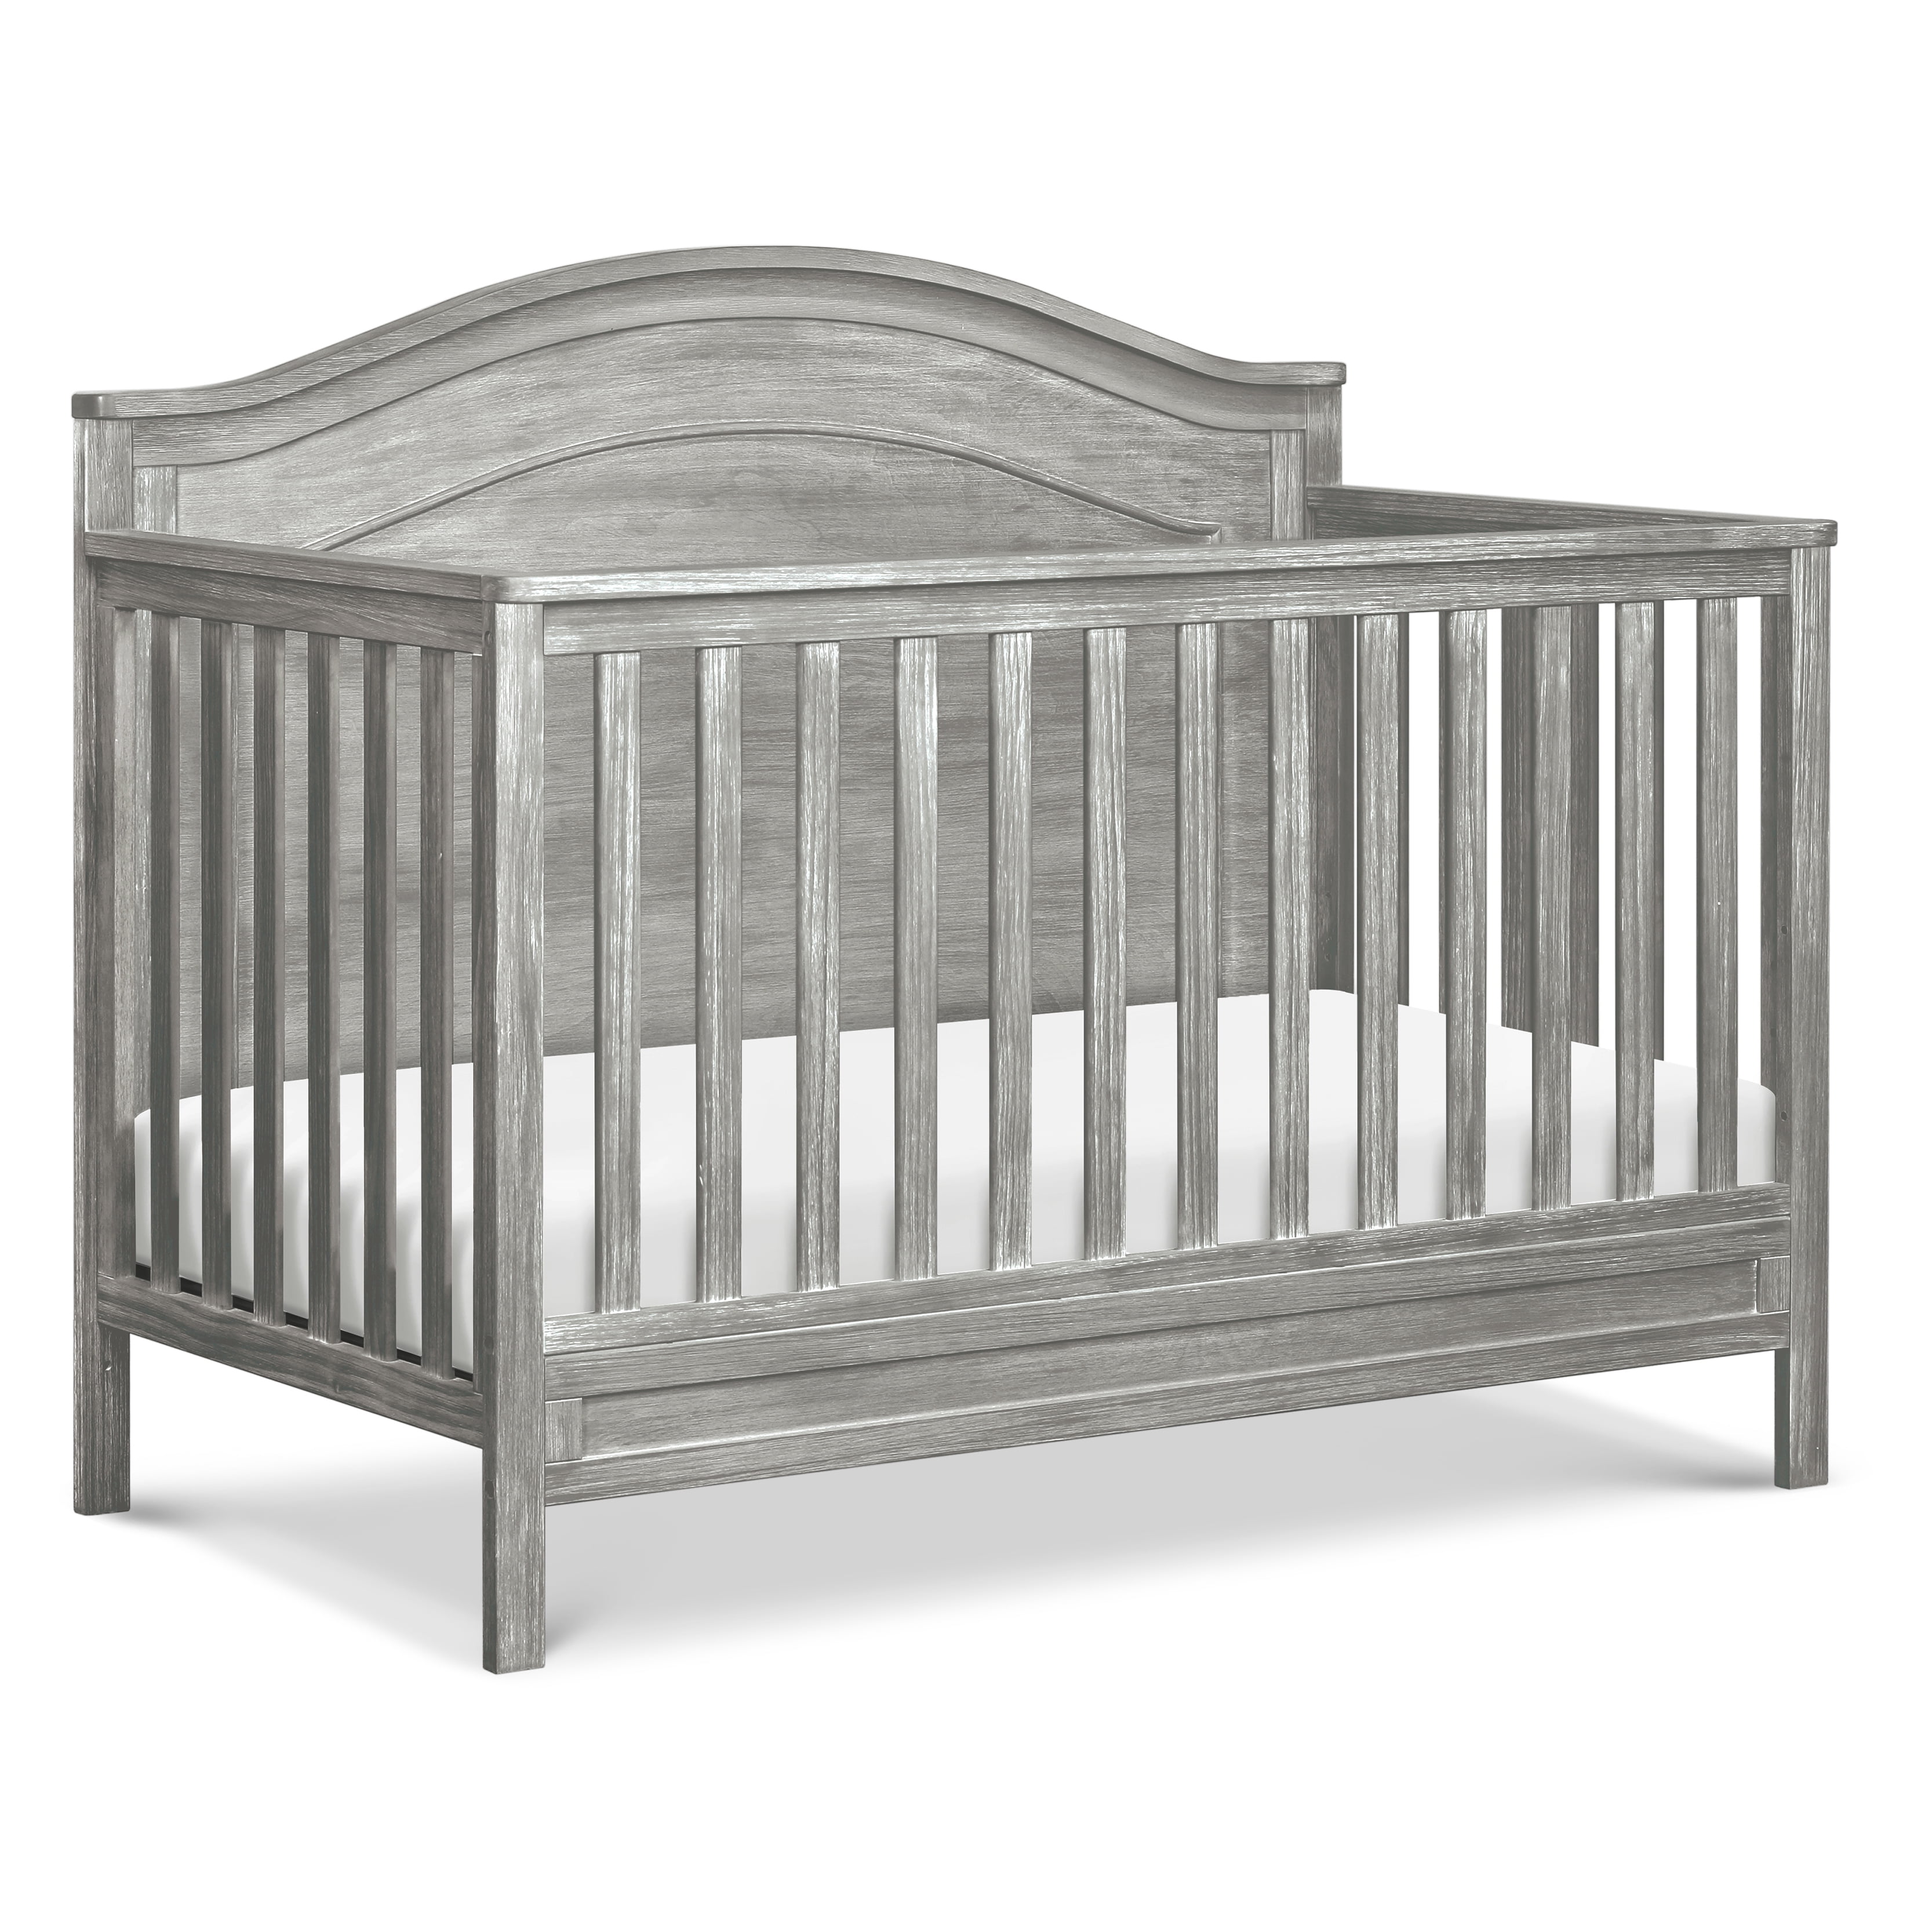 DaVinci Charlie 4in1 Convertible Crib in Cottage Grey